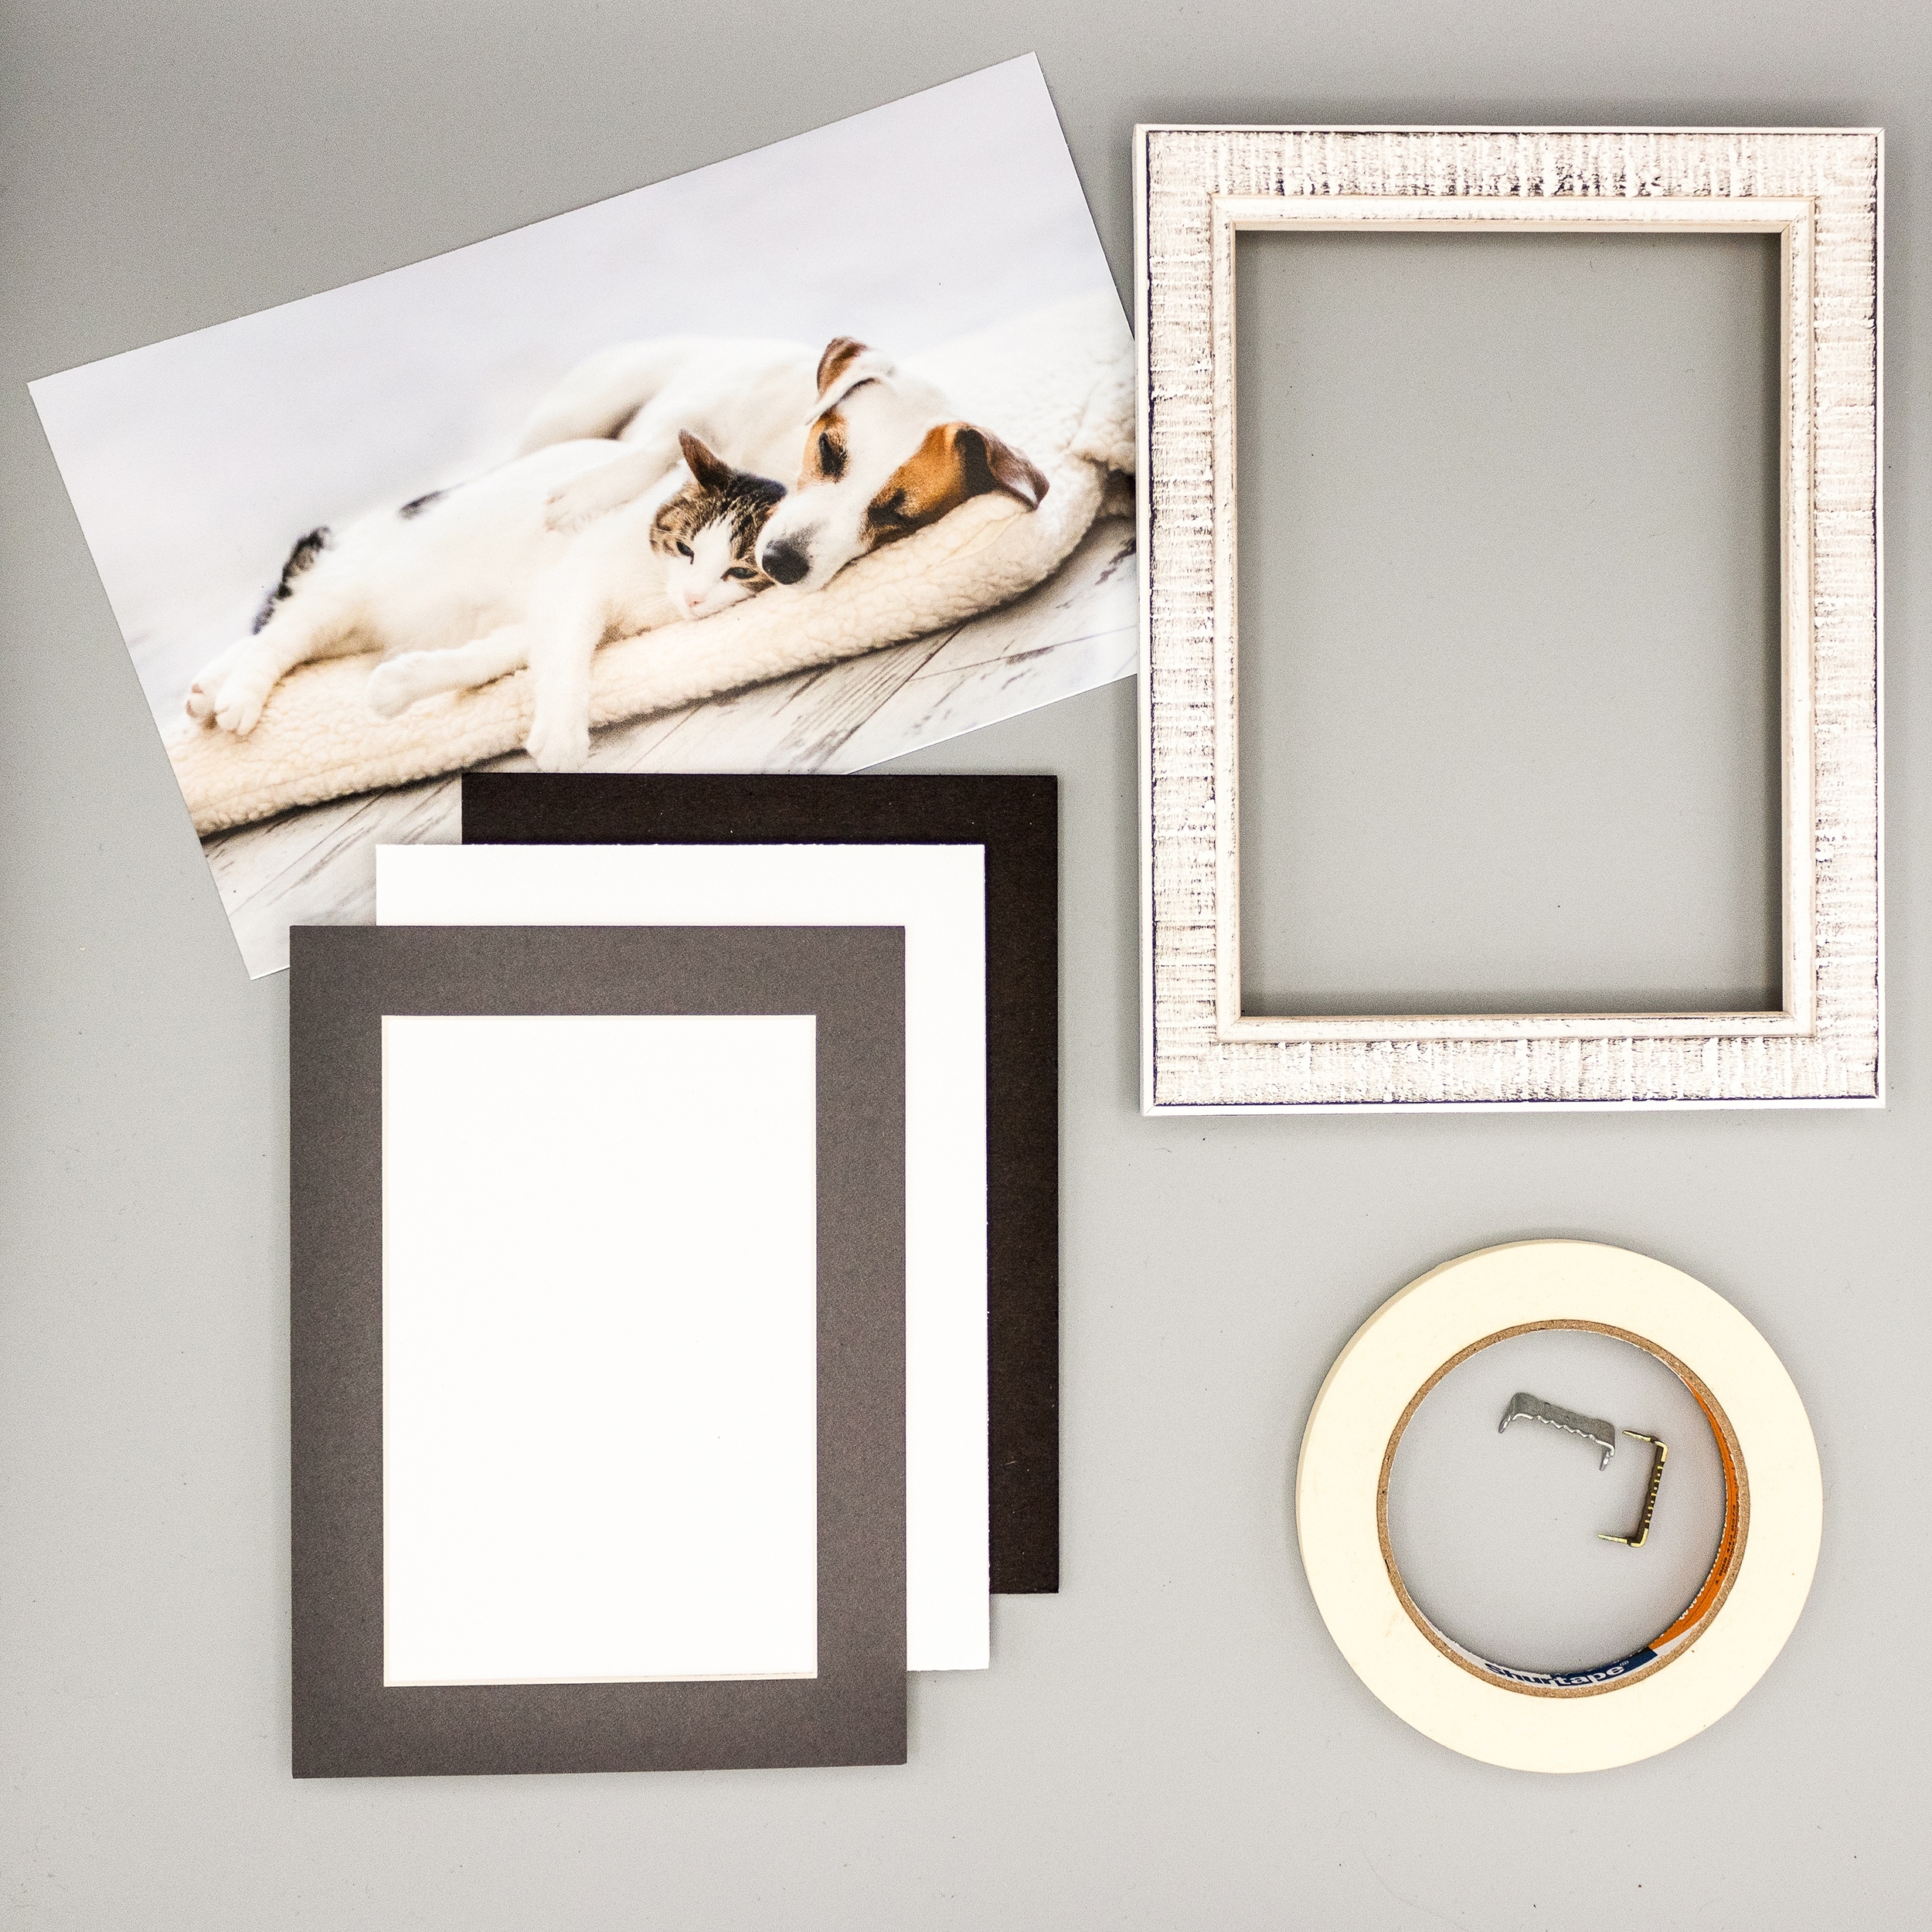 5x7 Mat for 8x10 Frame - Precut Mat Board Acid-Free Charcoal 5x7 Photo  Matte Made to Fit a 8x10 Picture Frame - Bed Bath & Beyond - 38873786